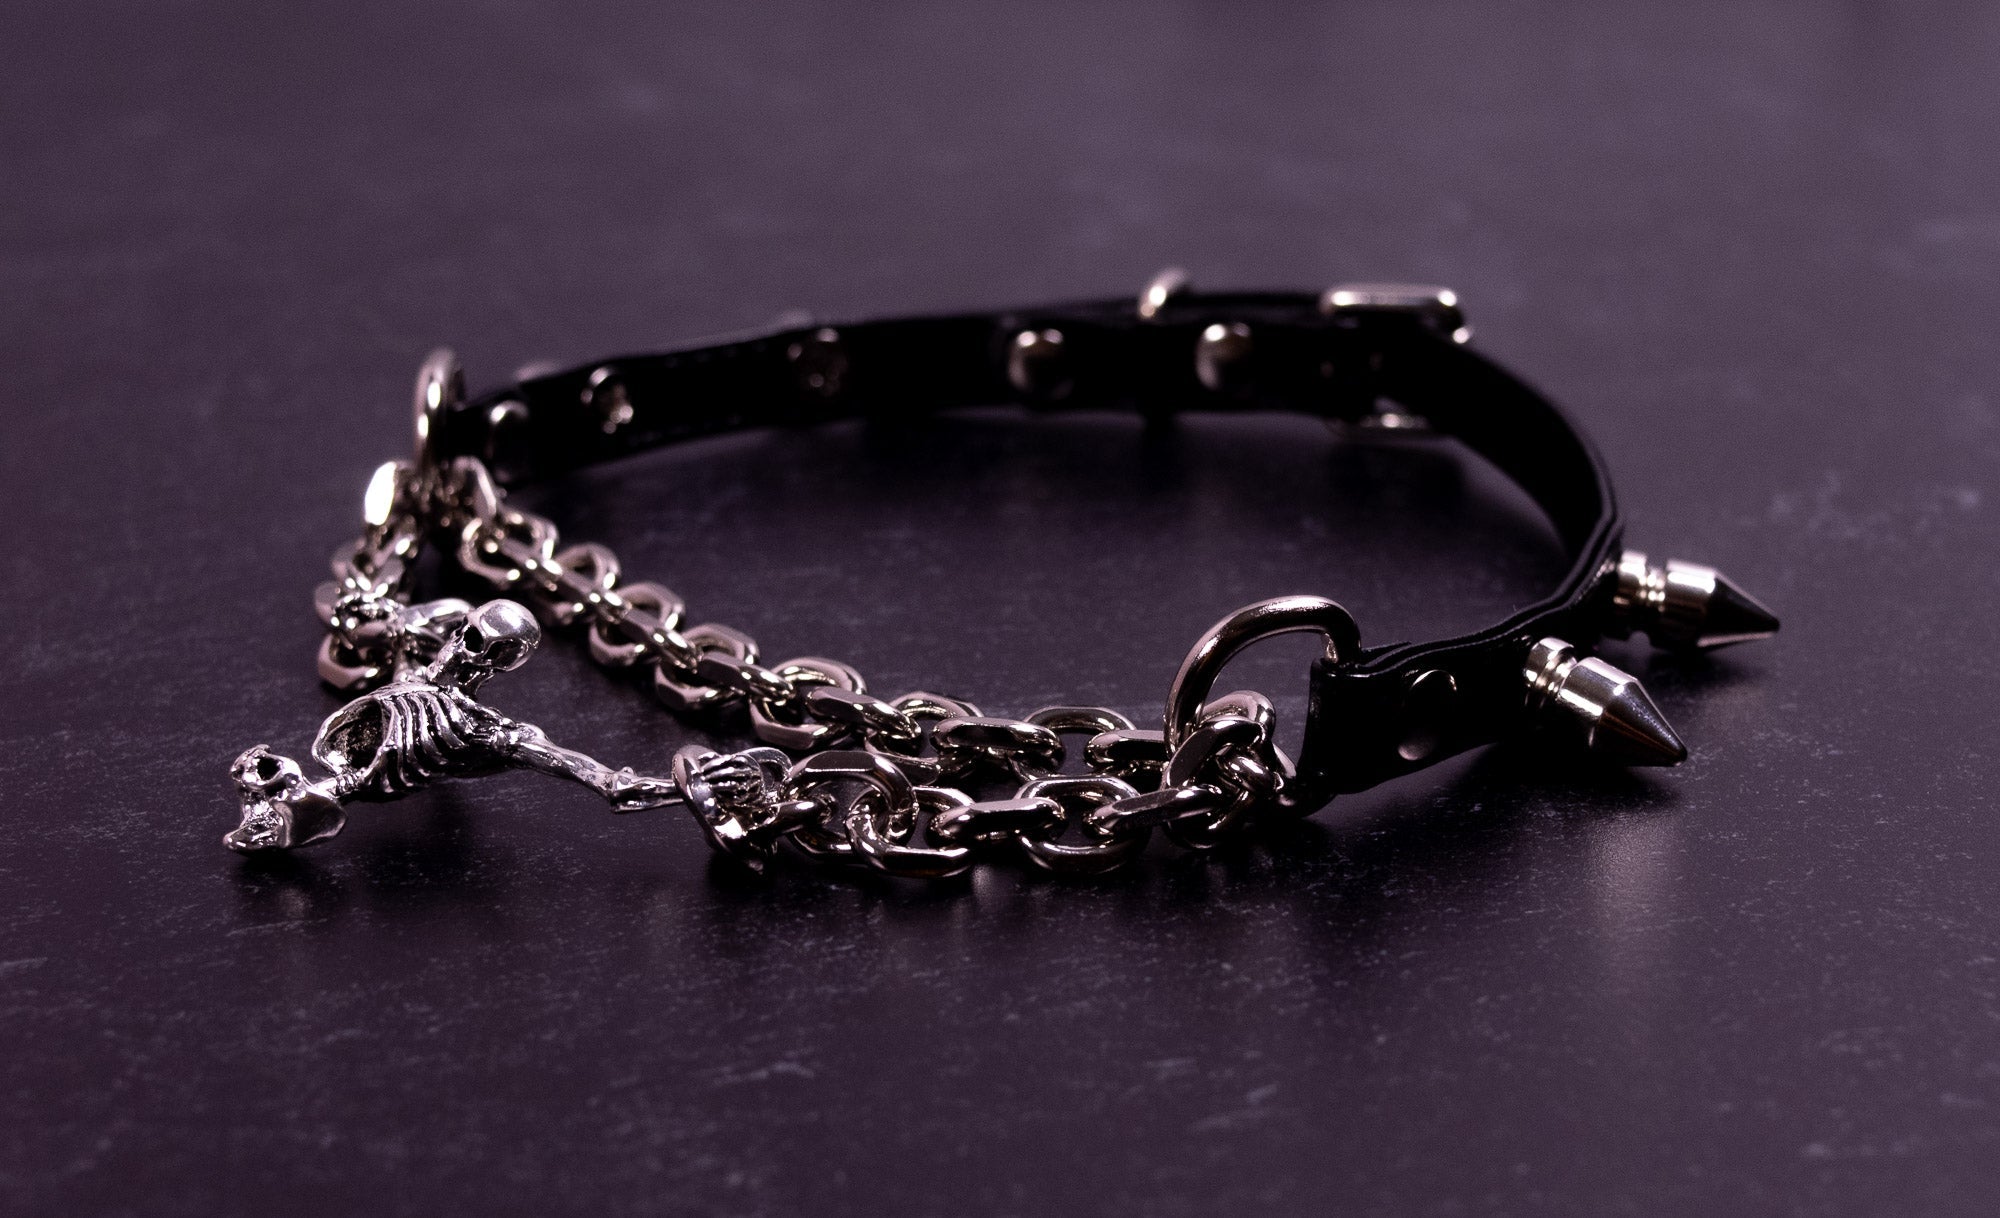 Spiked 'Chained Up' - 3/8" Black Vegan Leather Martingale Collar